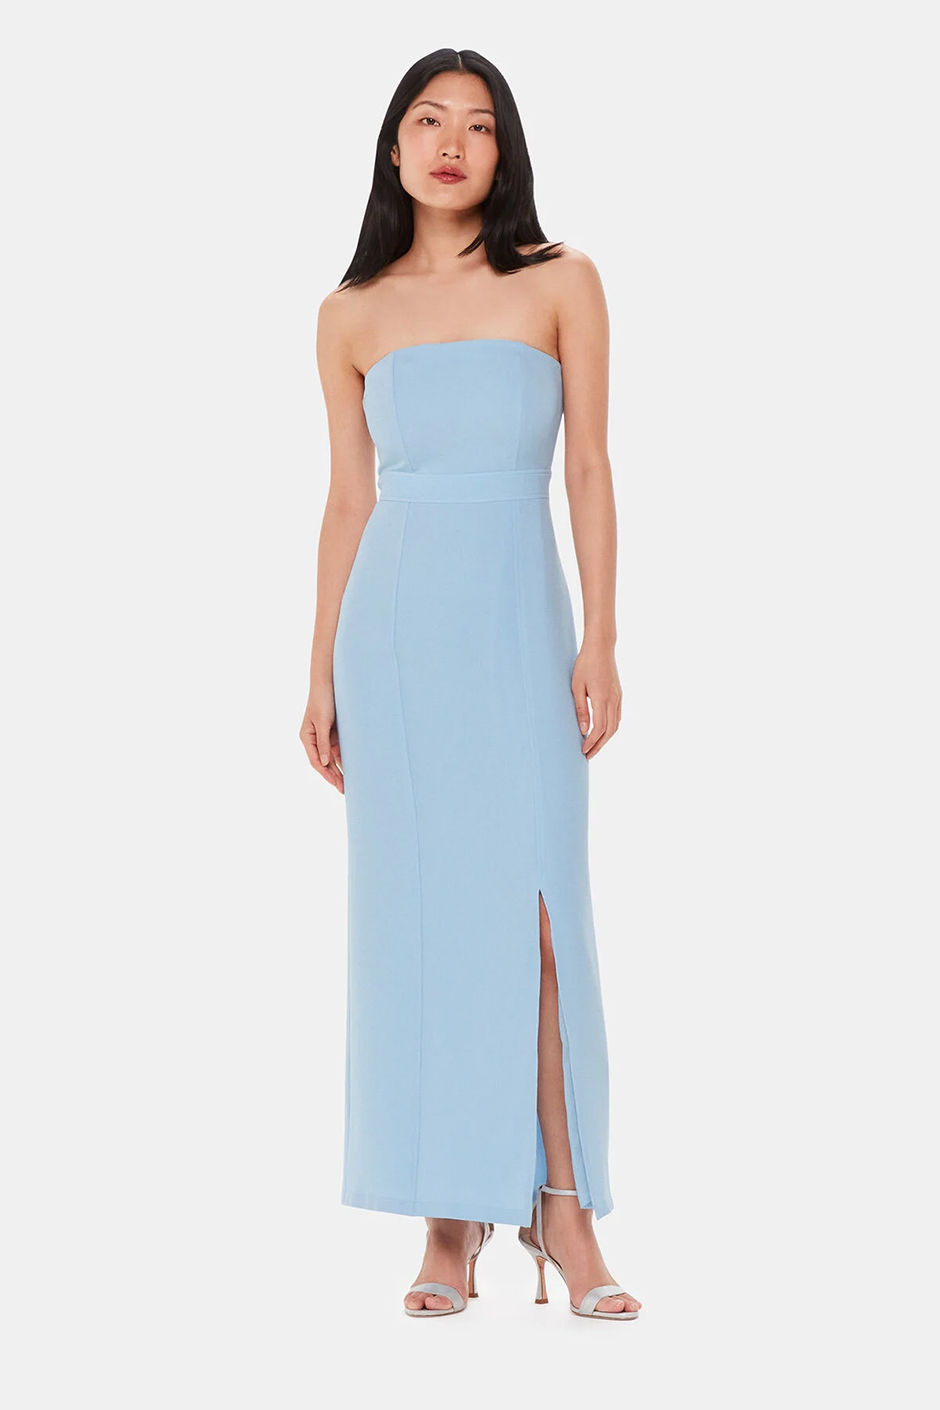 Spring bridesmaid dress from Whistles - pale blue strapless formfitting dress with leg split 